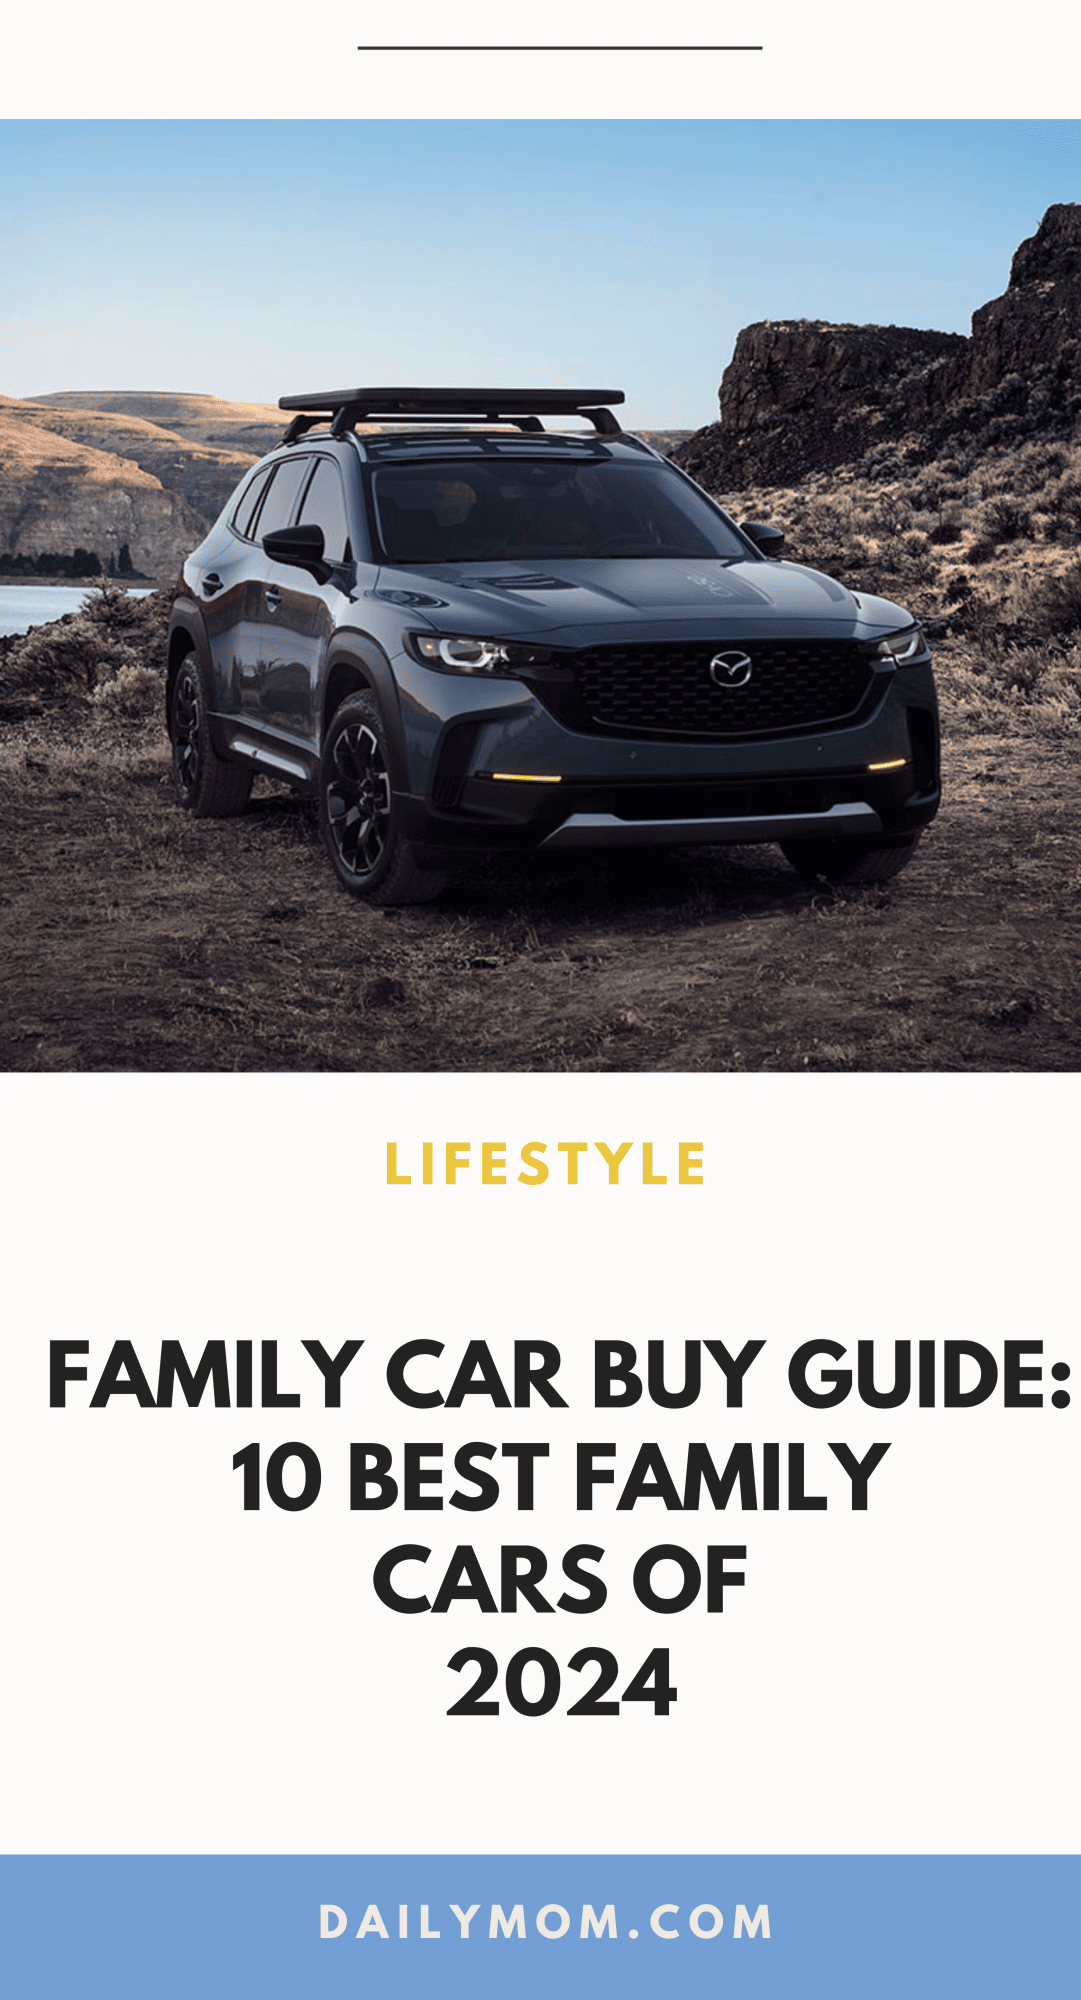 Test Drive: 10 Best Family Cars In 2024 2 Daily Mom, Magazine For Families